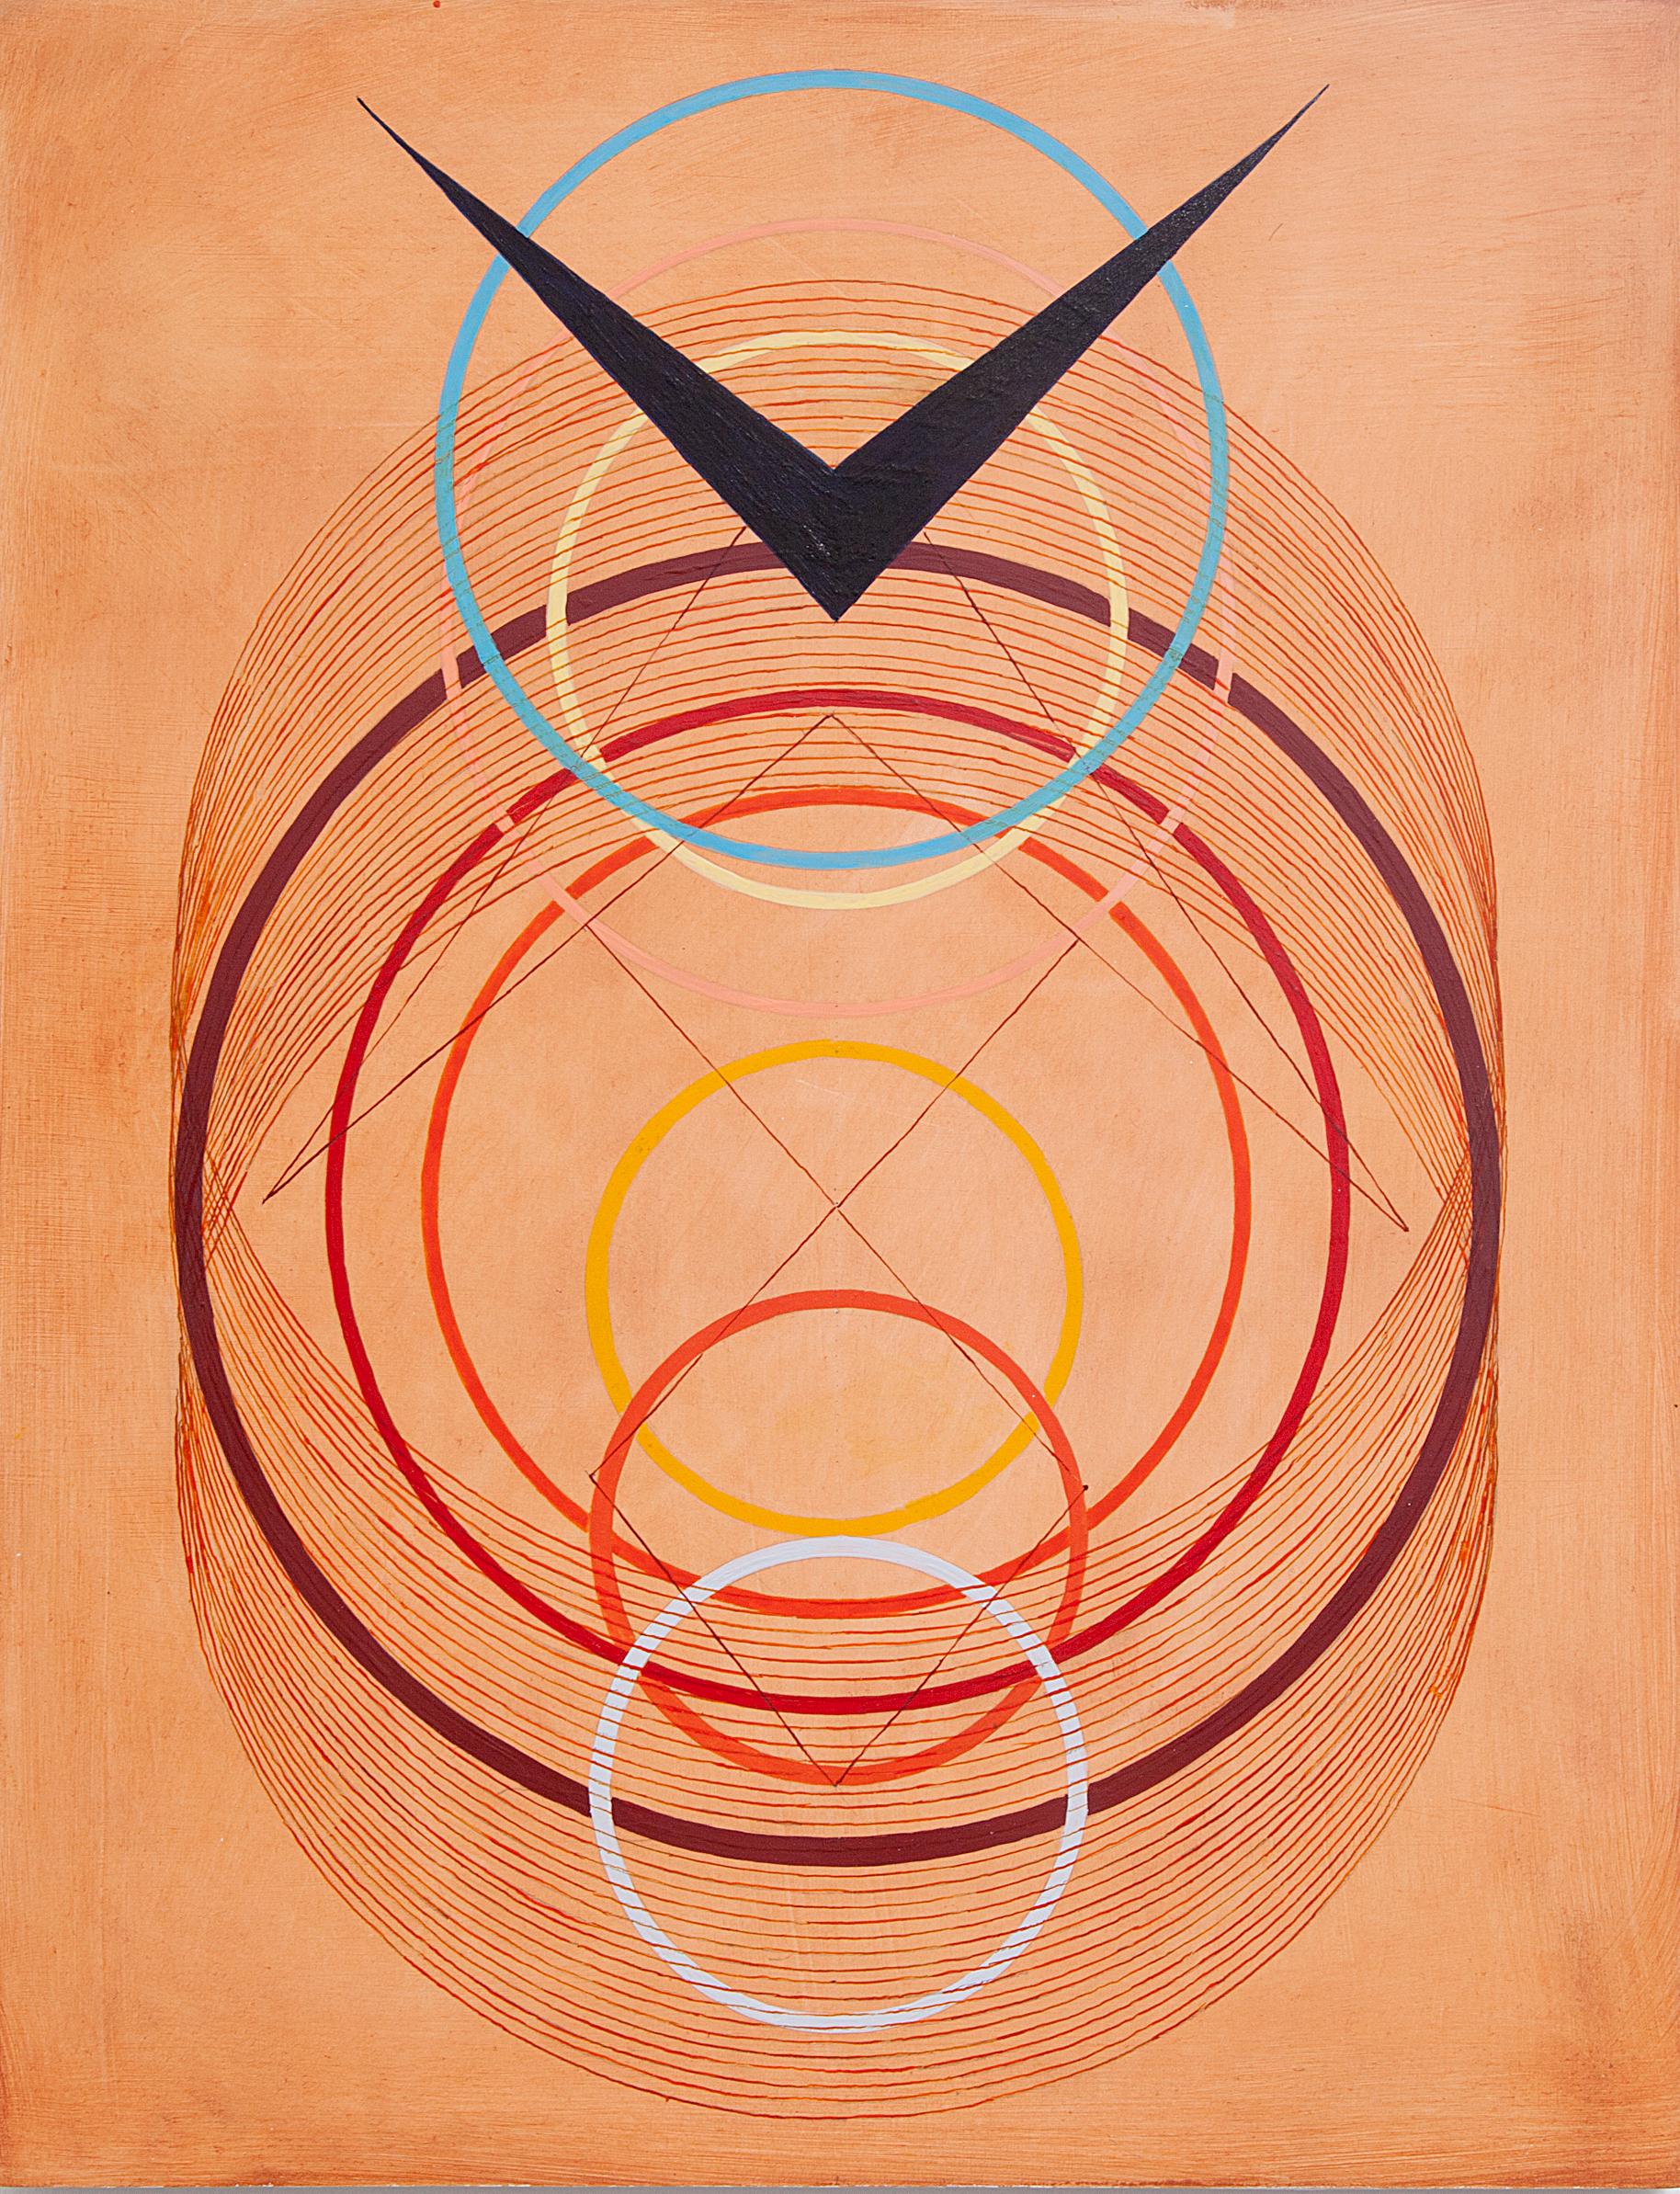 Tayo Heuser, Precession, 2016, ink on wood panel, Meditative, Geometric Abstract For Sale 2